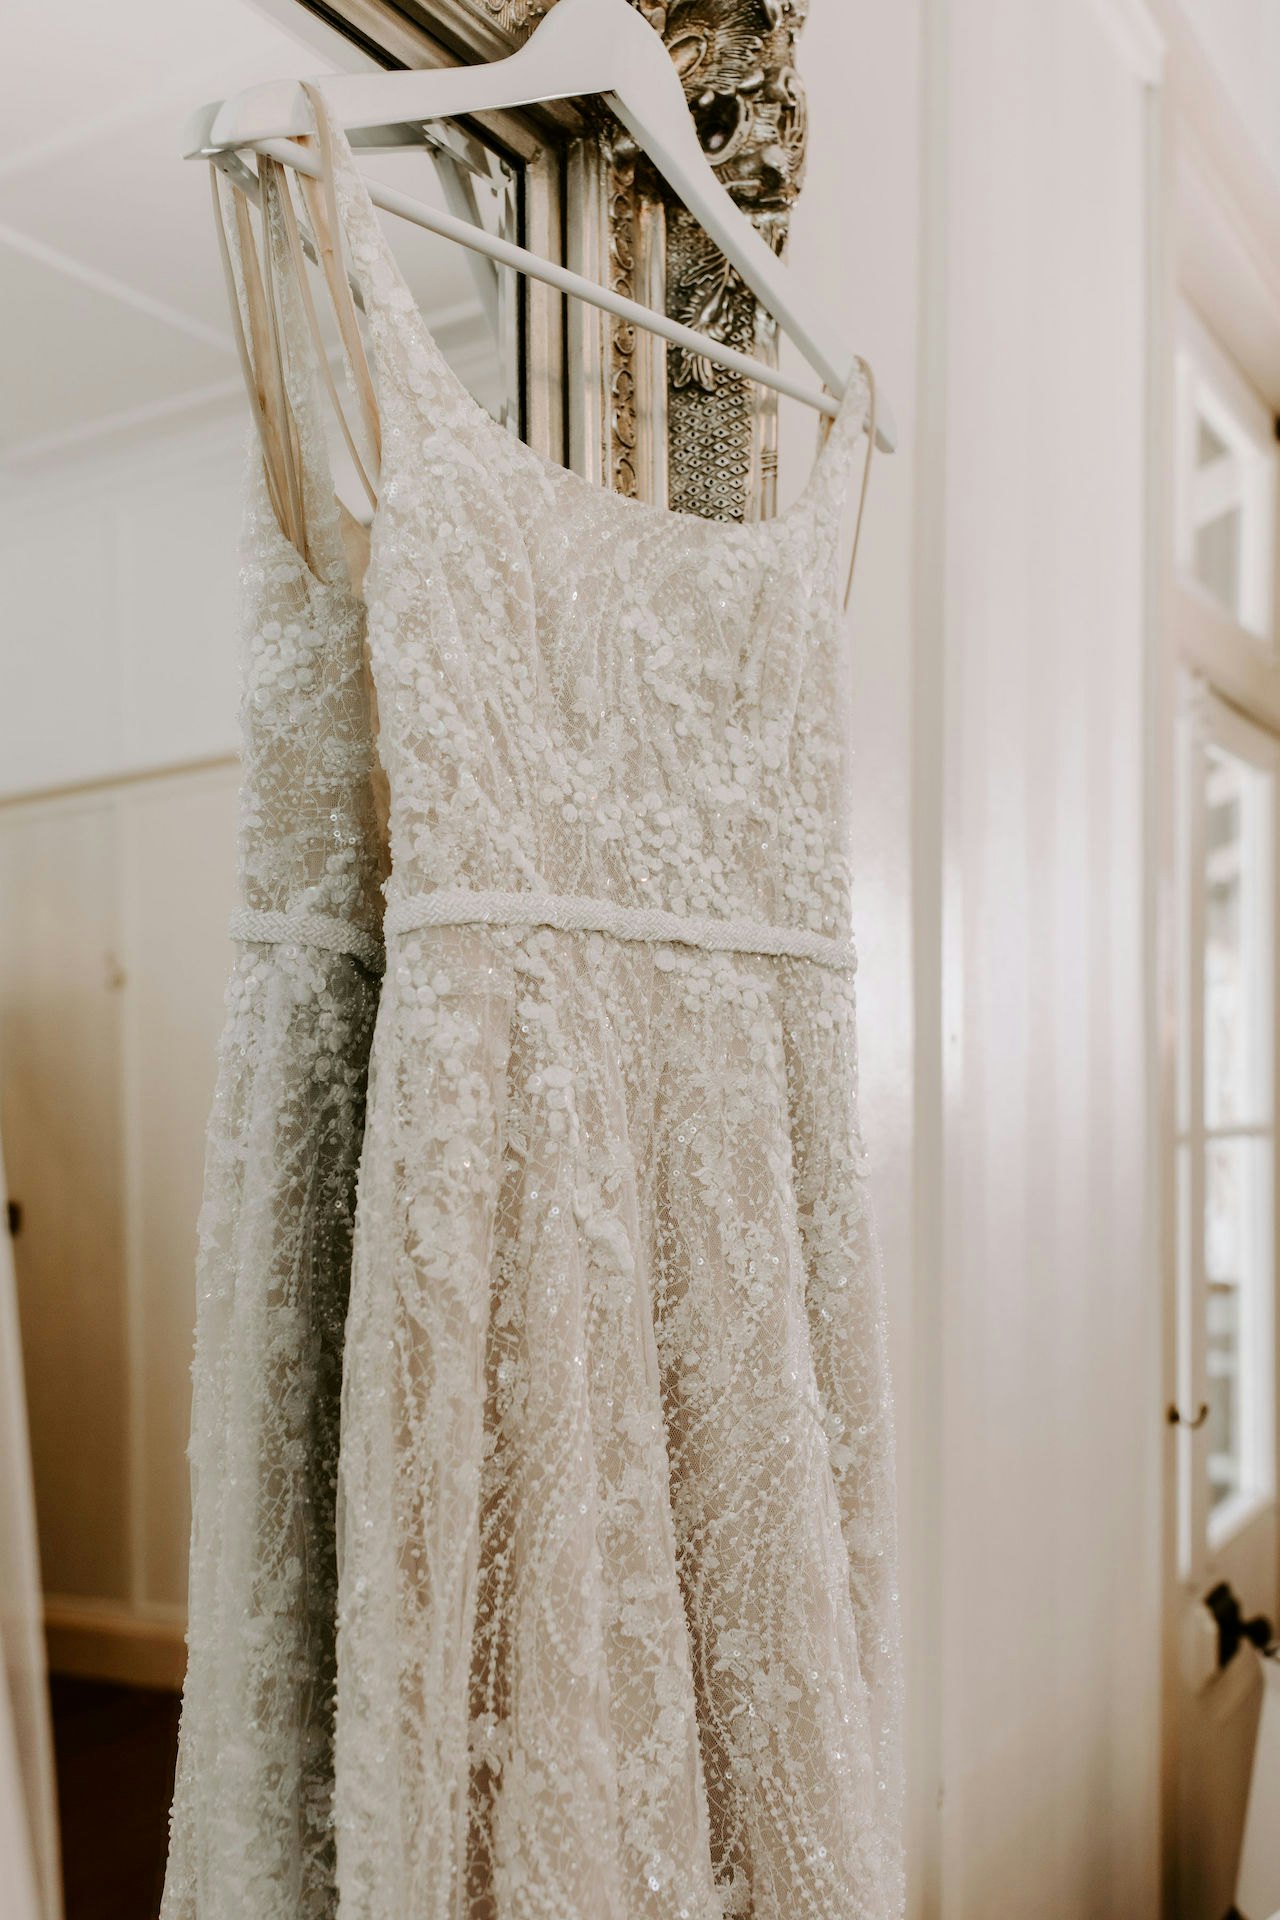 Wedding dress hanging in front of mirror 